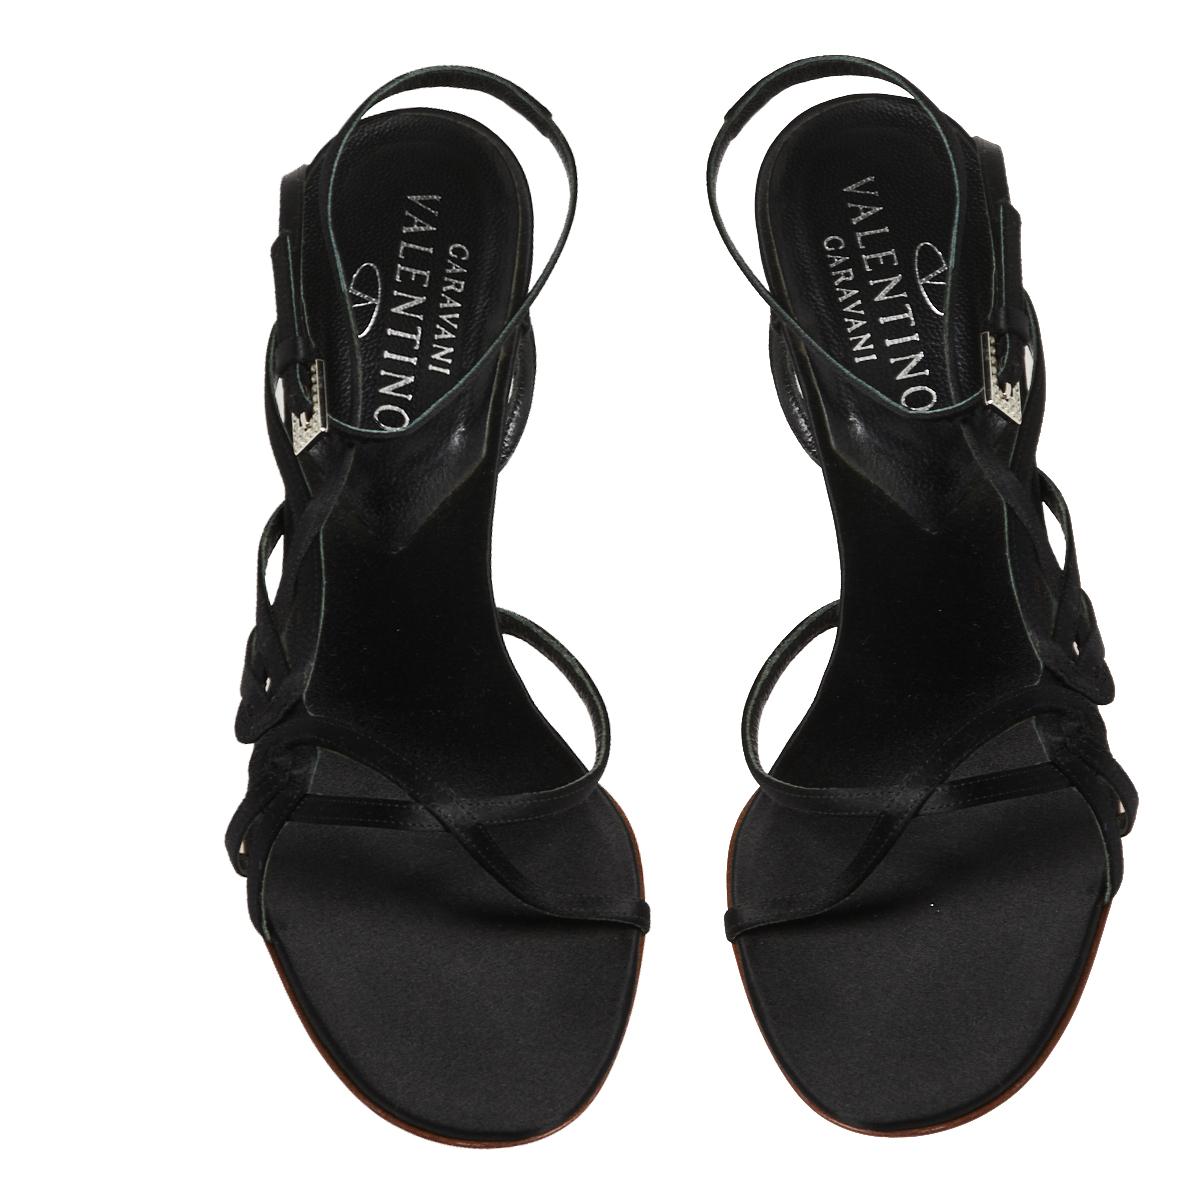 Perfect to flaunt, this pair of sandals by Valentino is amazing. The black sandals have been crafted from satin in an open-toe strappy silhouette and equipped with buckled ankle straps. They are elevated on 10 cm stiletto heels. The comfortable